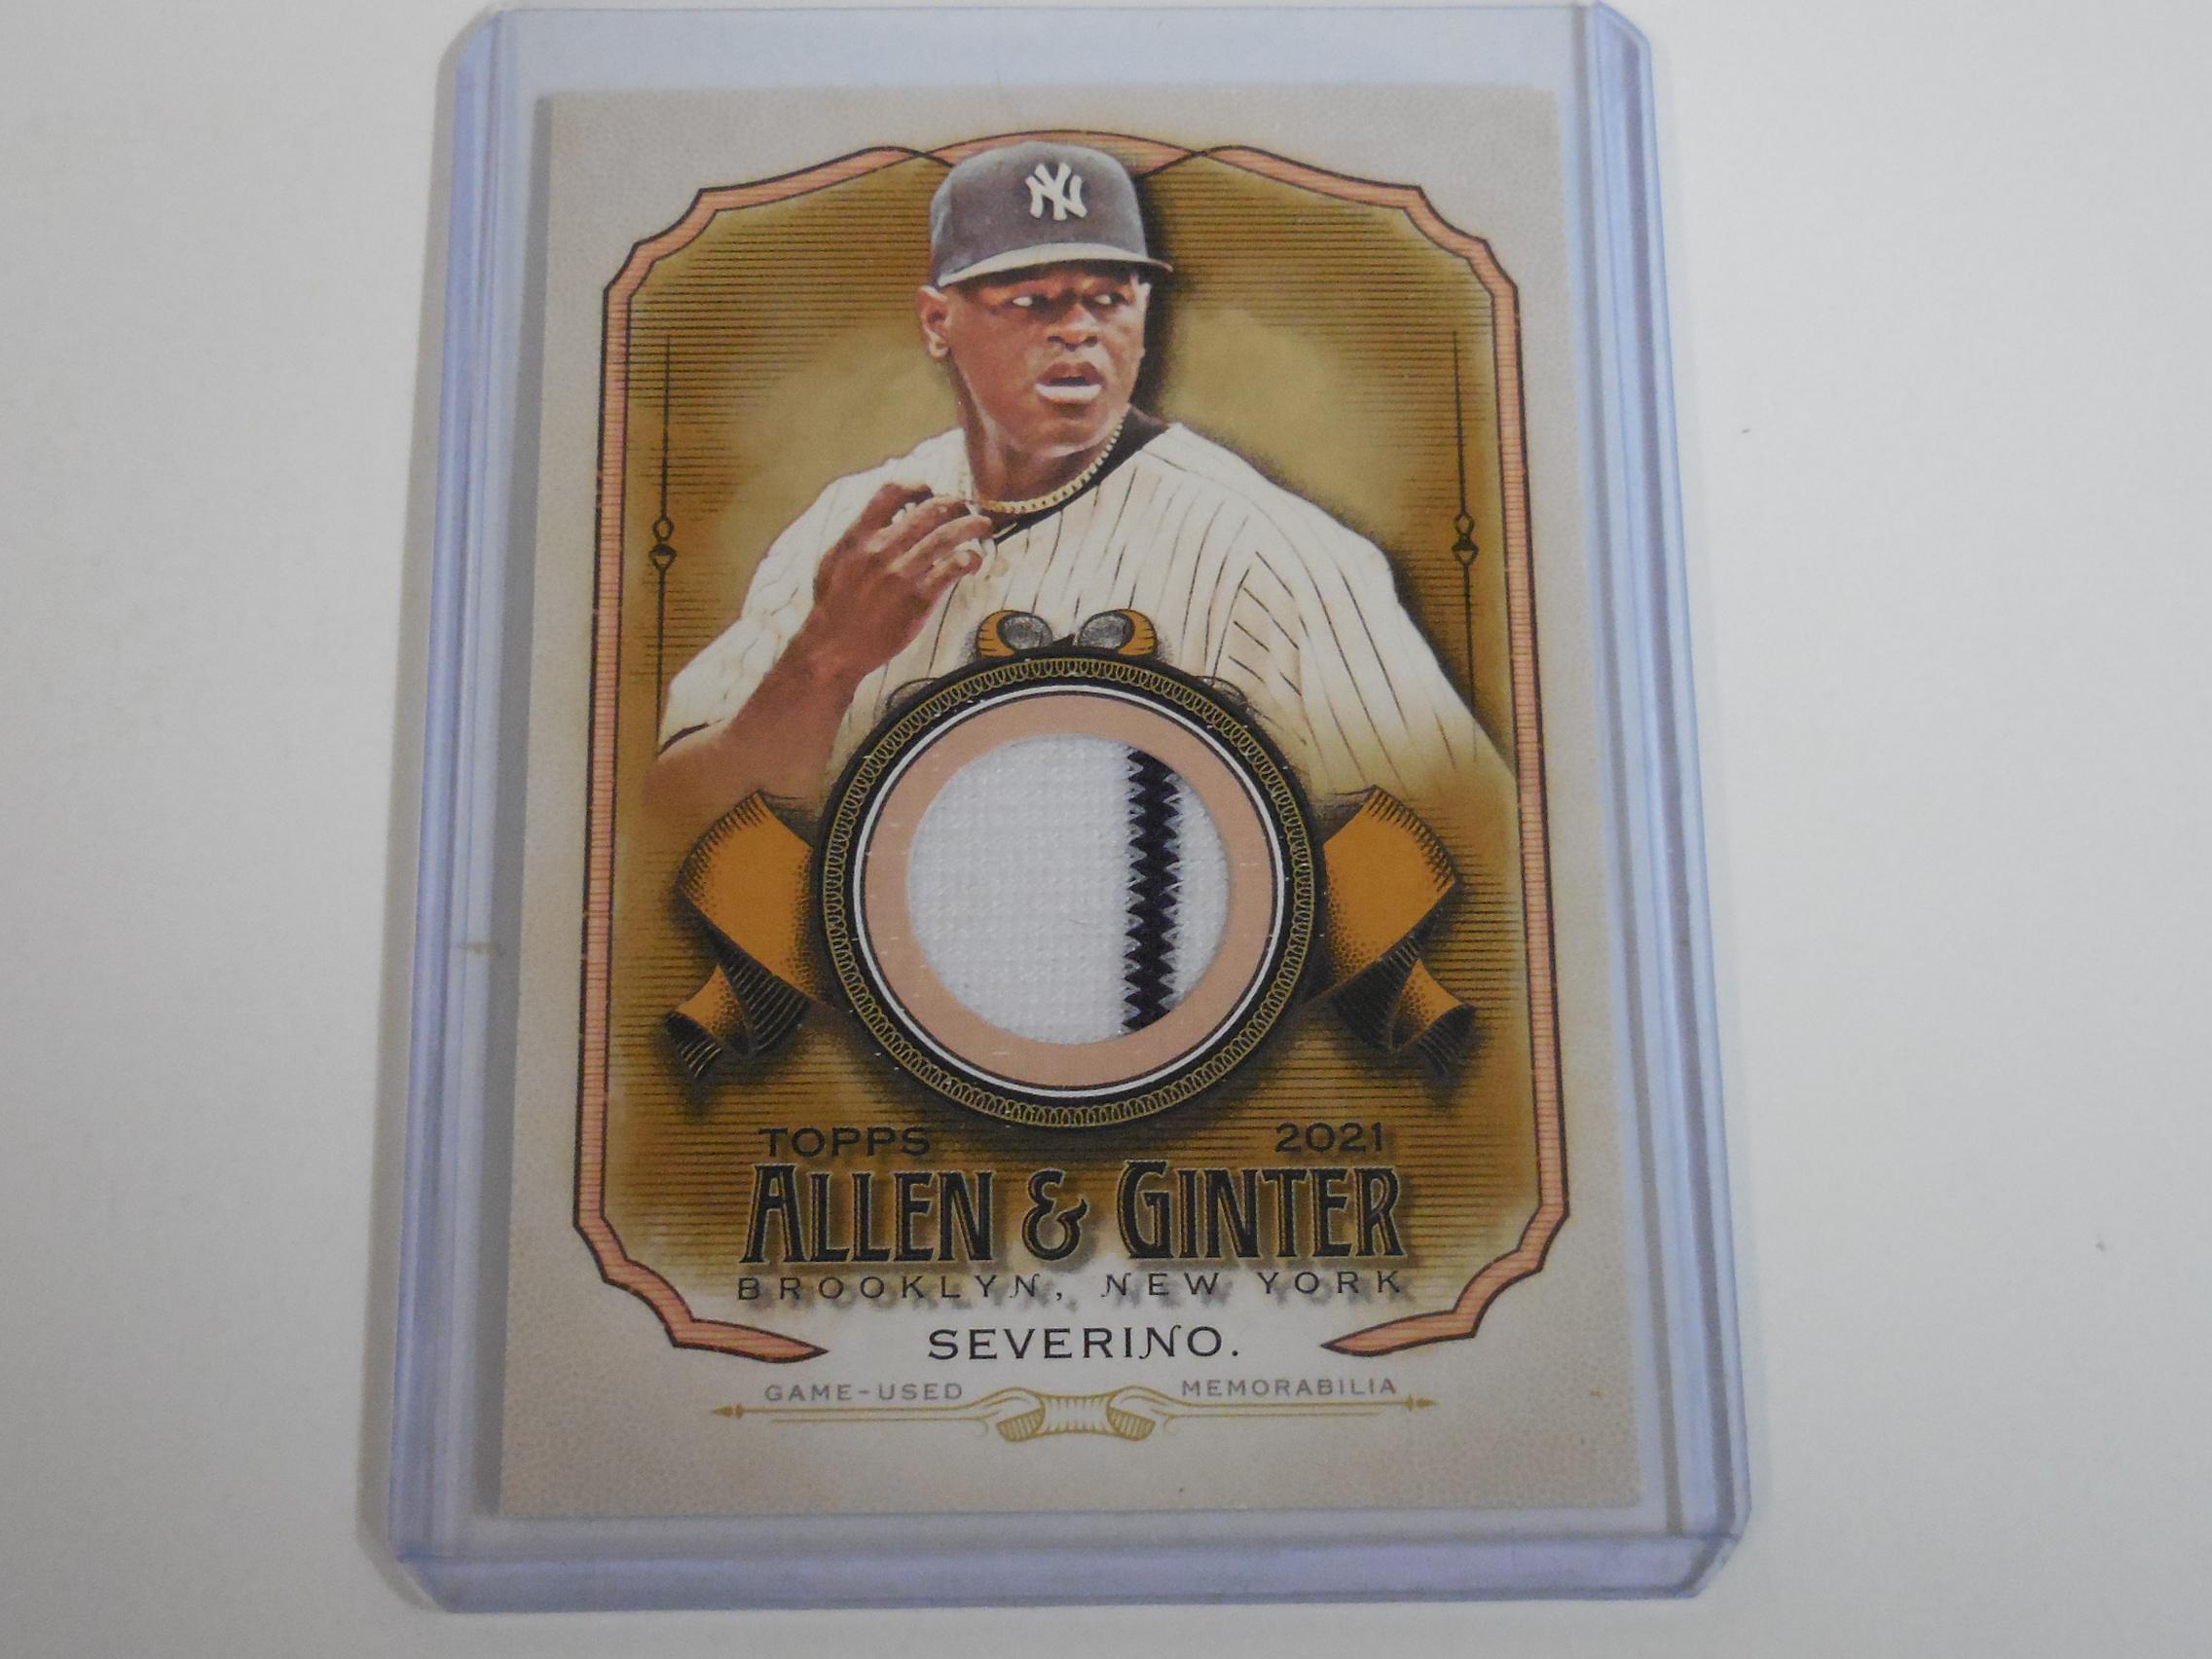 2021 TOPPS ALLEN GINTER LUIS SEVERINO GAME USED JERSEY CARD W/ PINSTRIPE YANKEES